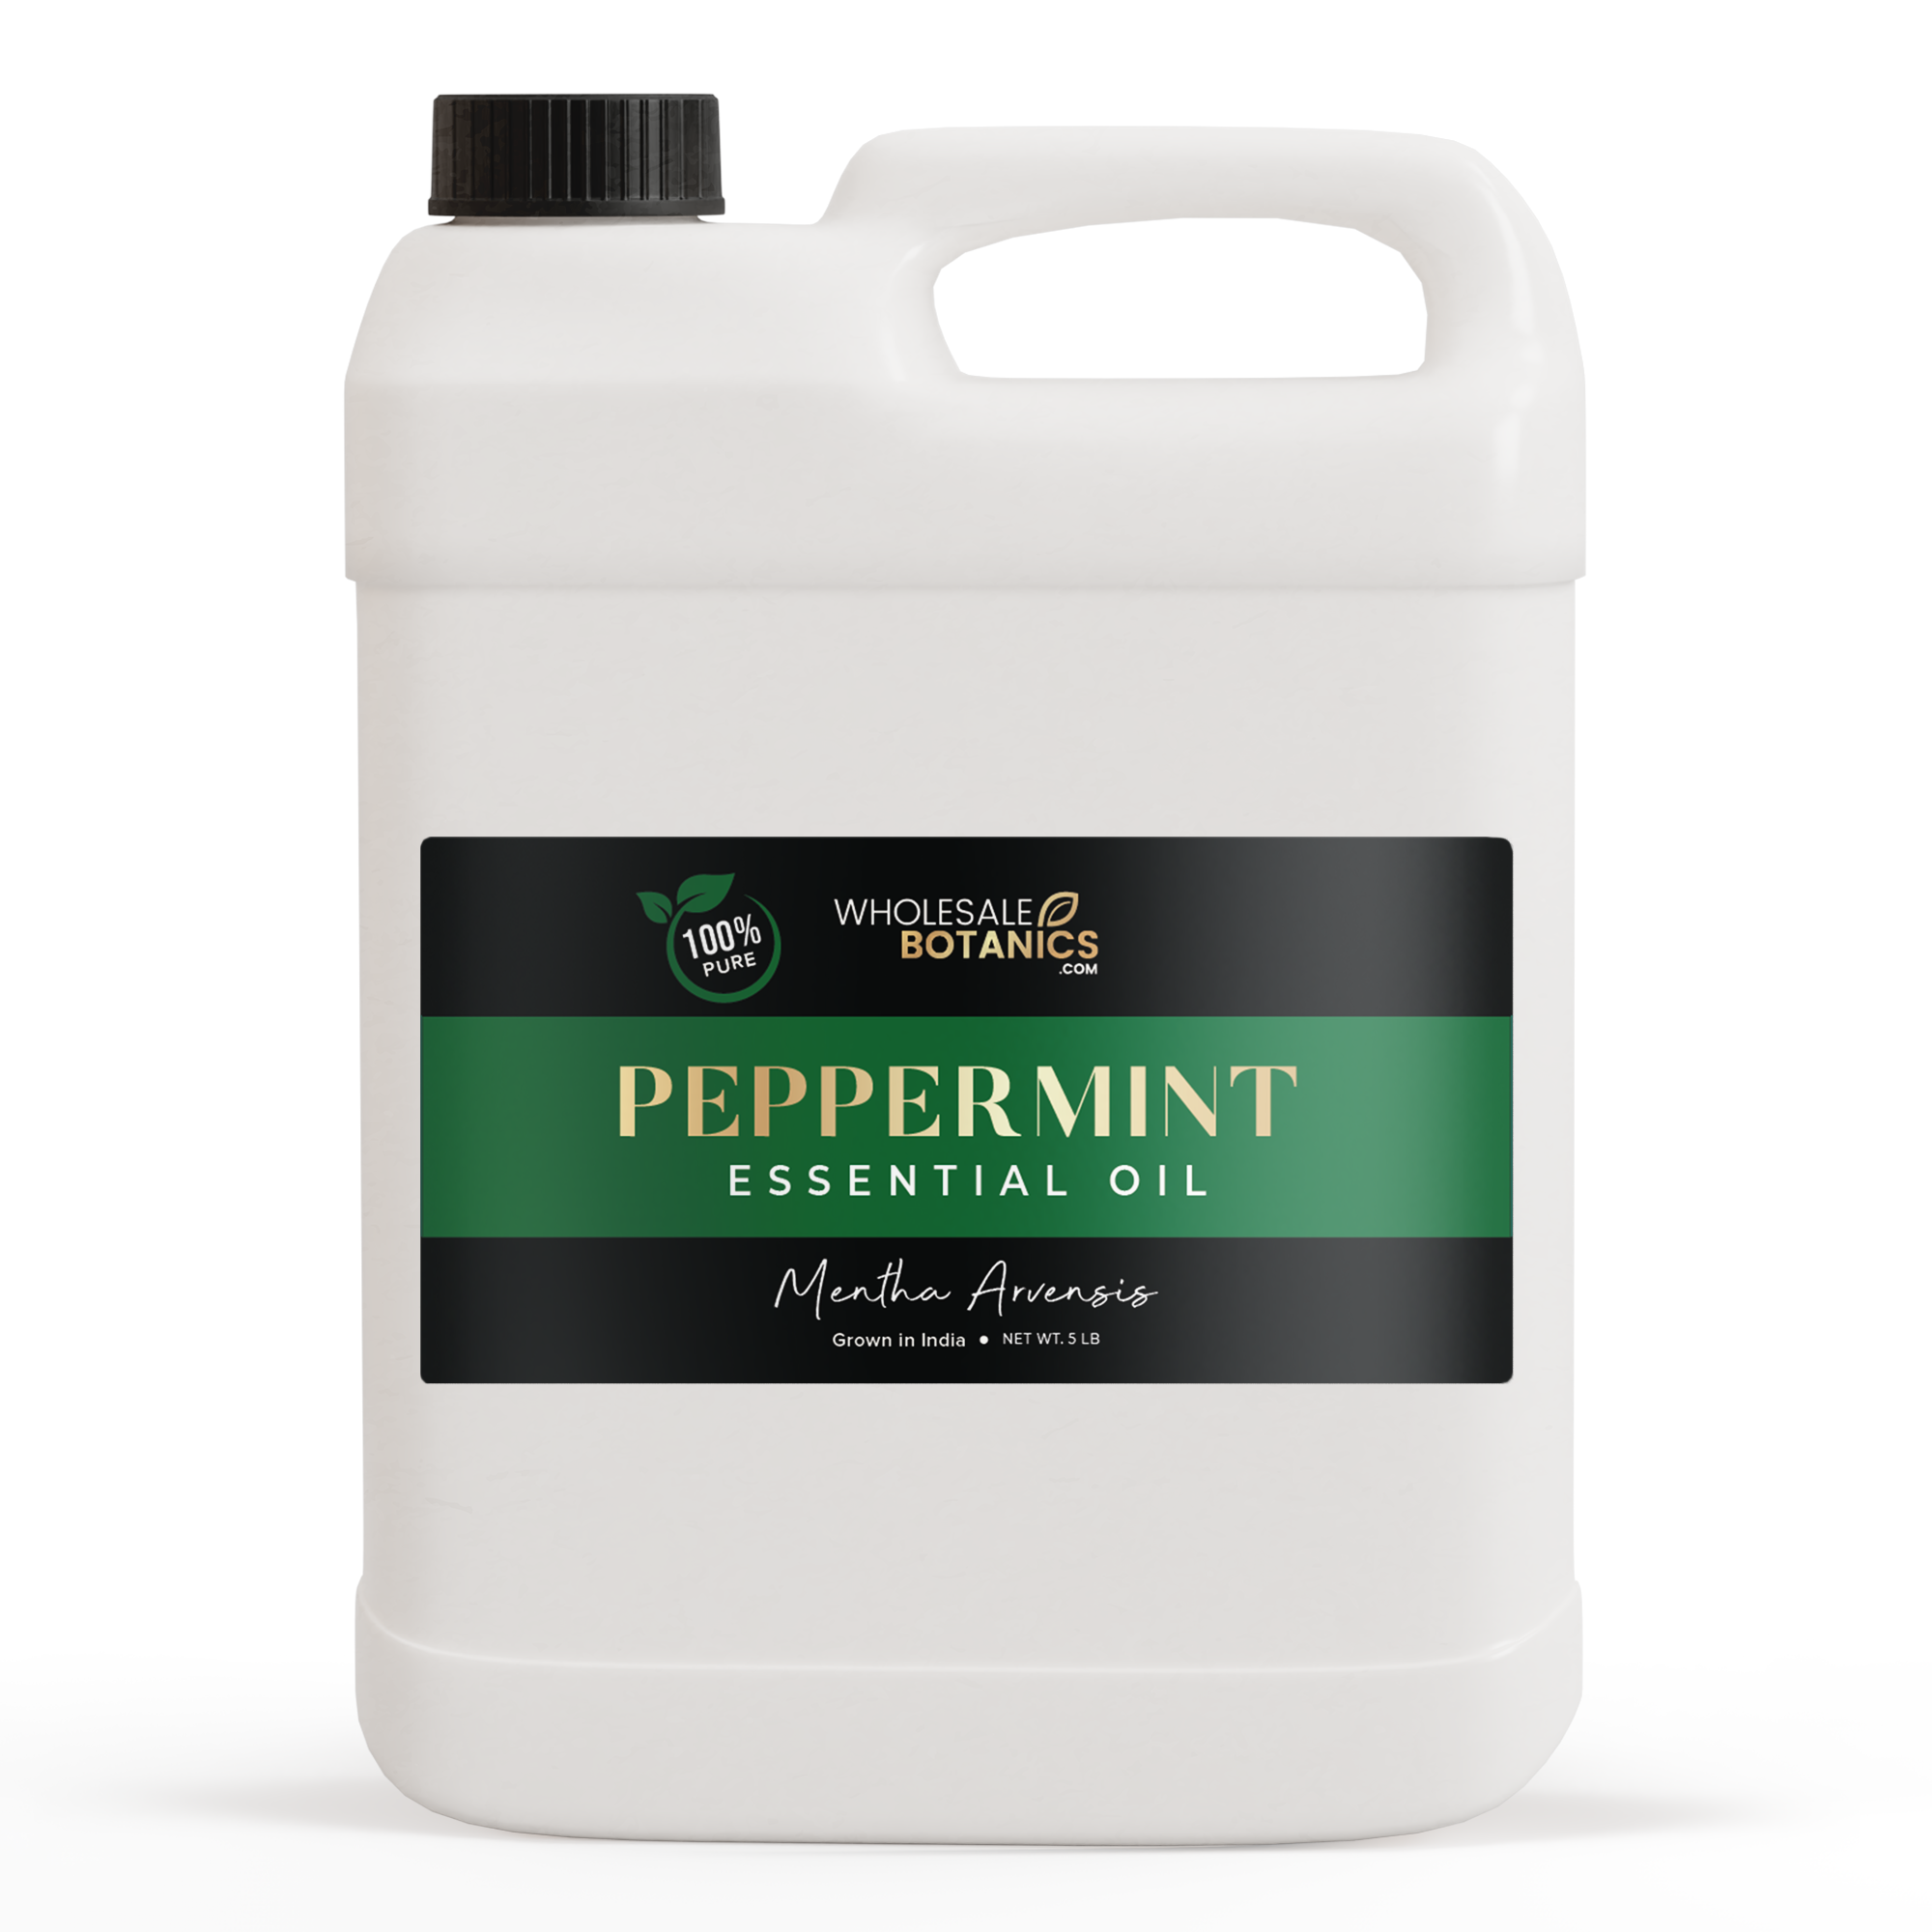 Purity Peppermint Essential Oil - Pure Mentha Arvensis - 5 lb